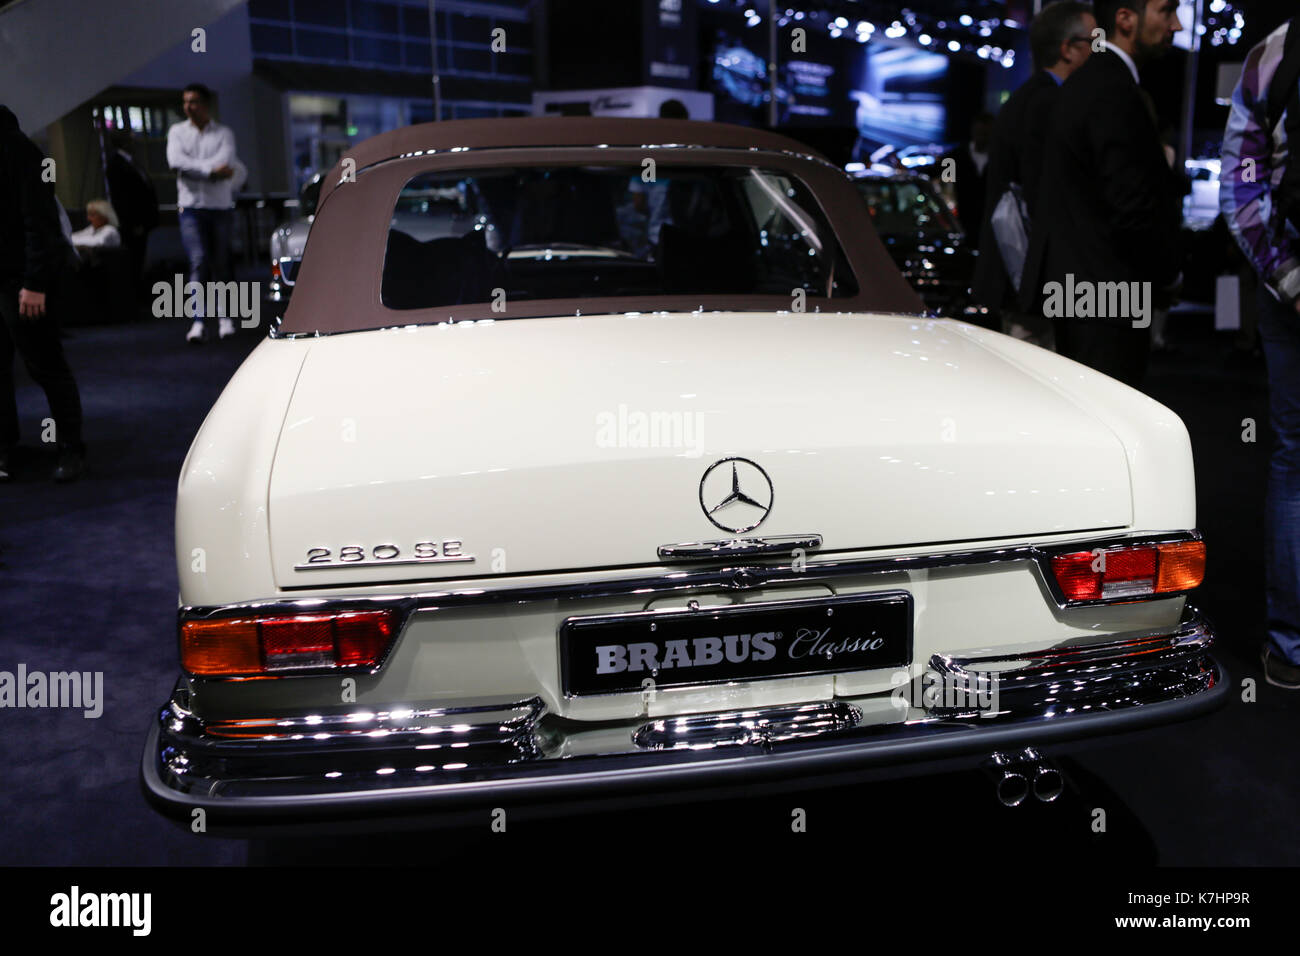 Frankfurt, Germany. 15th September 2017. The German car tuner Brabus Classic presents the Mercedes-Benz 280 SE Cabriolet at the 67. IAA. The 67. Internationale Automobil-Ausstellung (IAA in Frankfurt is with over 1000 exhibitors one of the largest Motor Shows in the world. The show will open for the general public from the 16th until the 24th September. Stock Photo